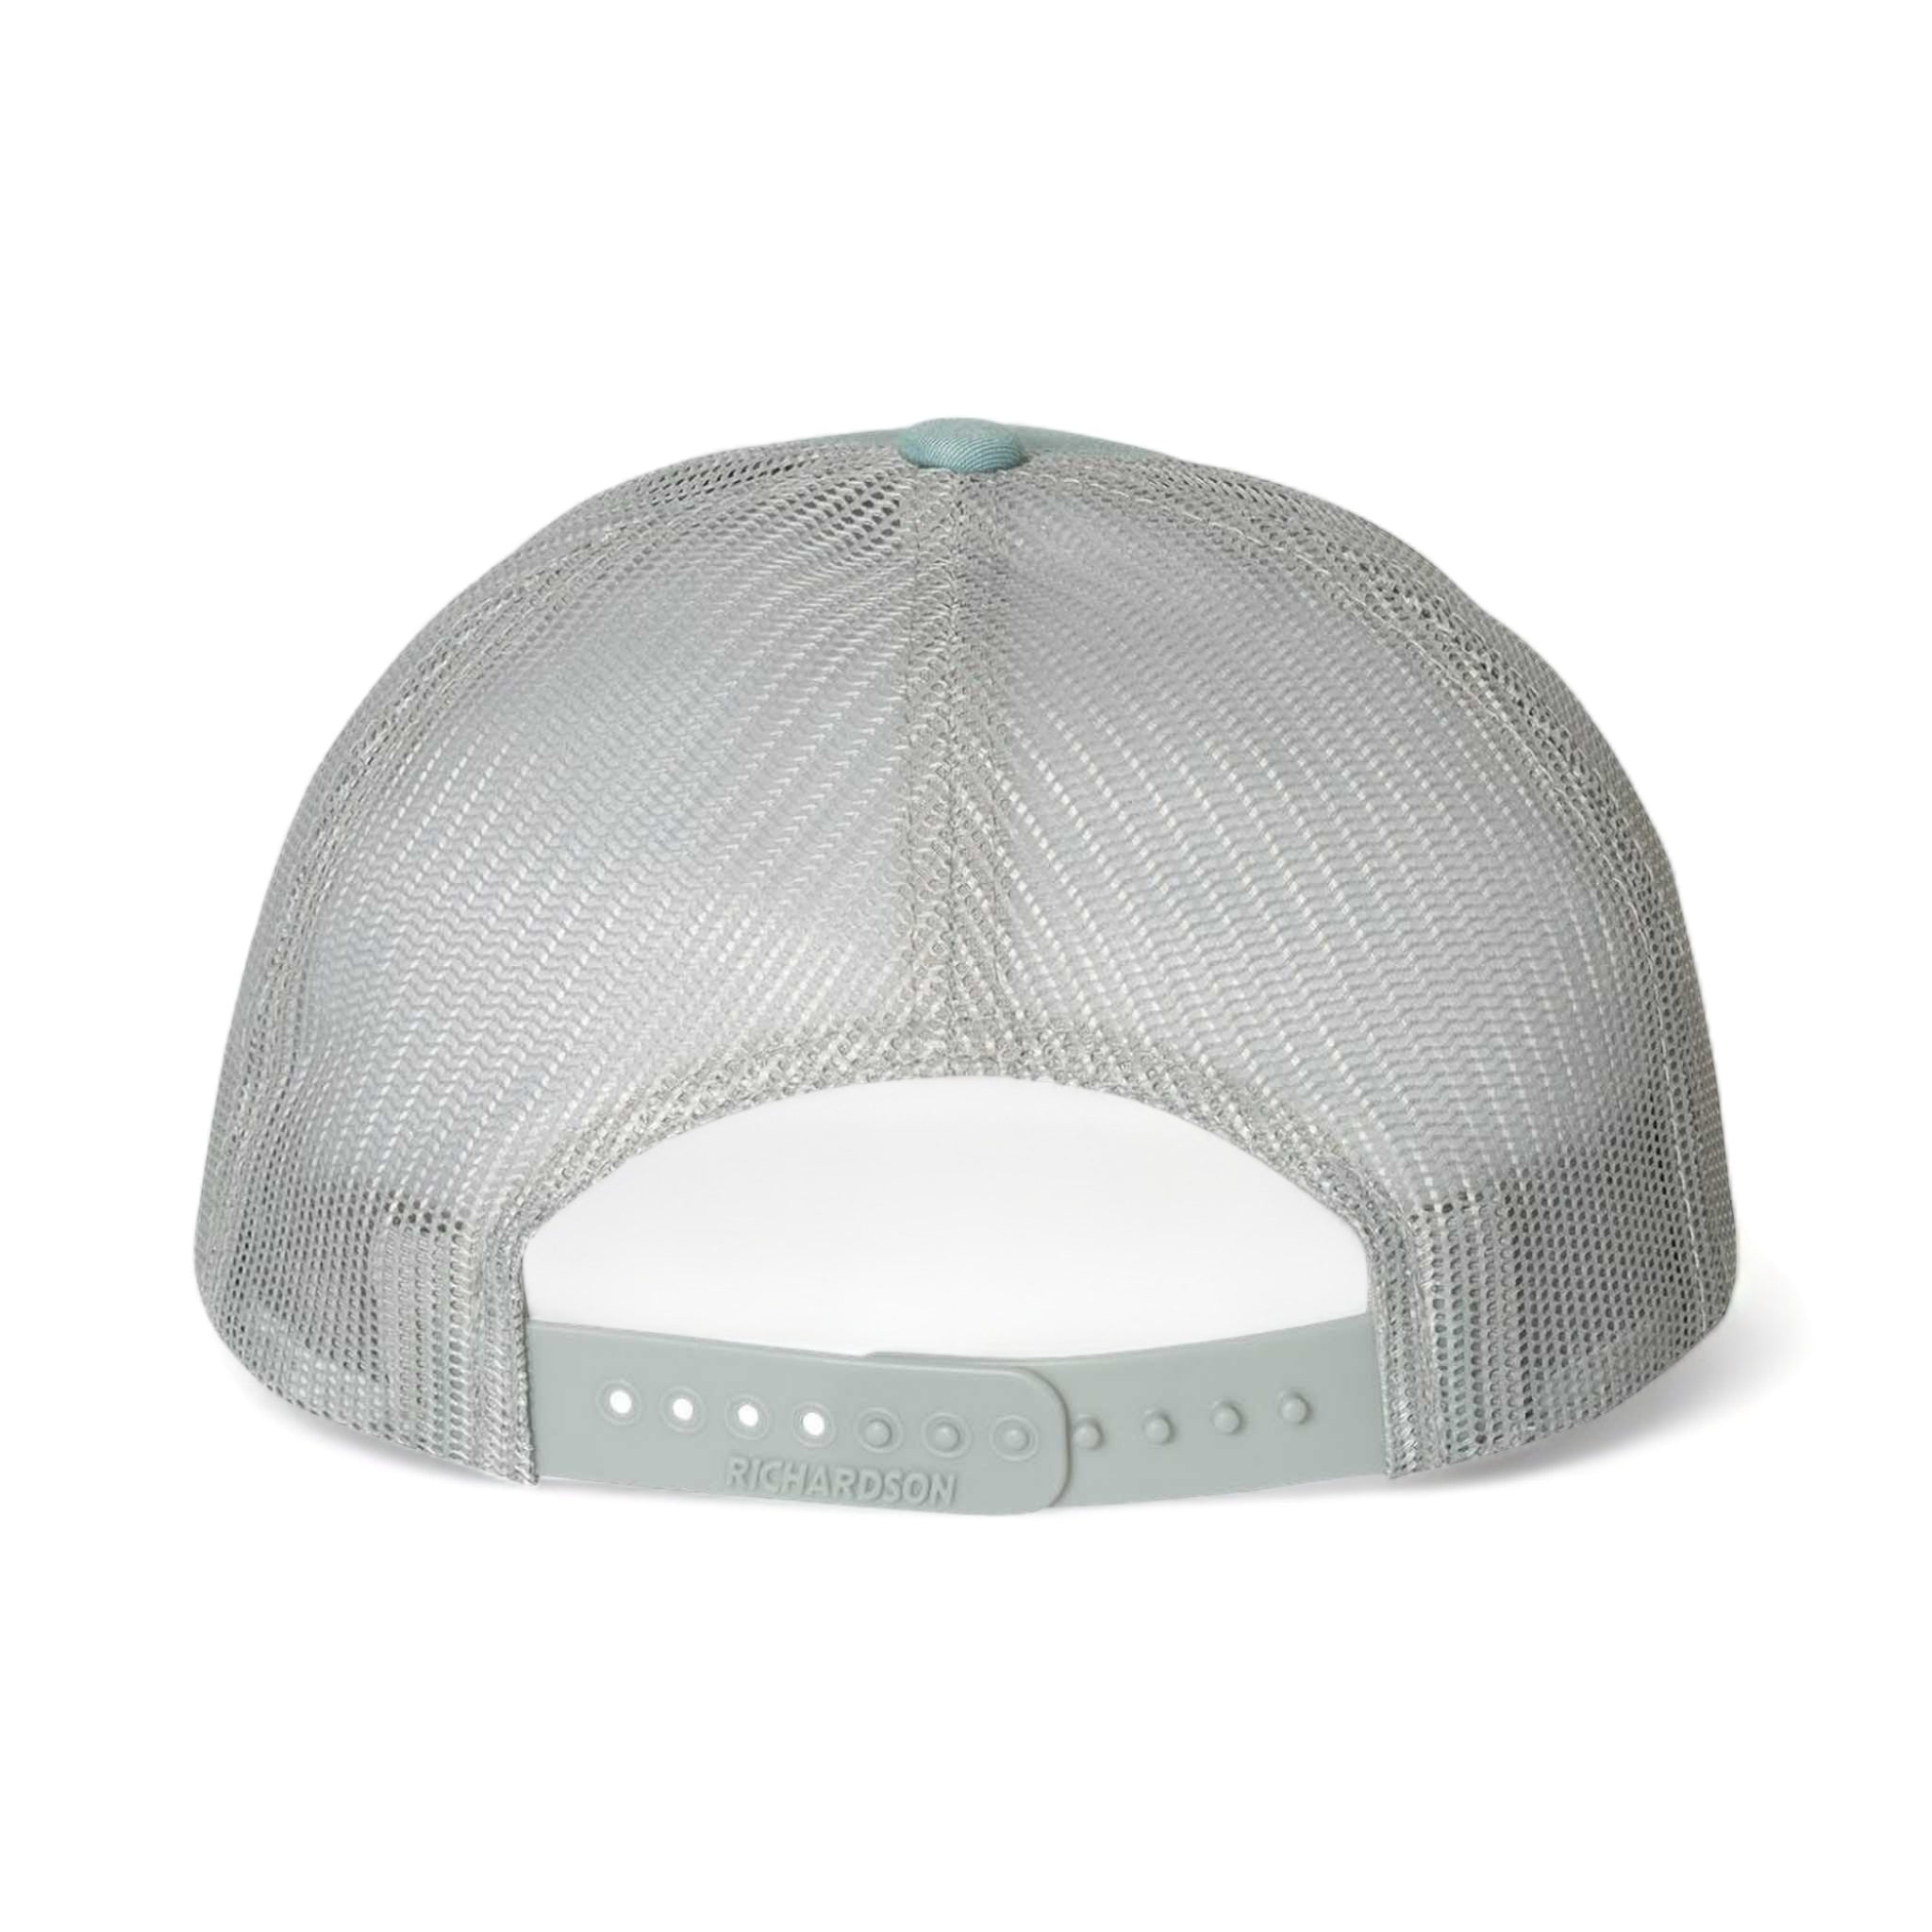 Back view of Richardson 115 custom hat in smoke blue and aluminum